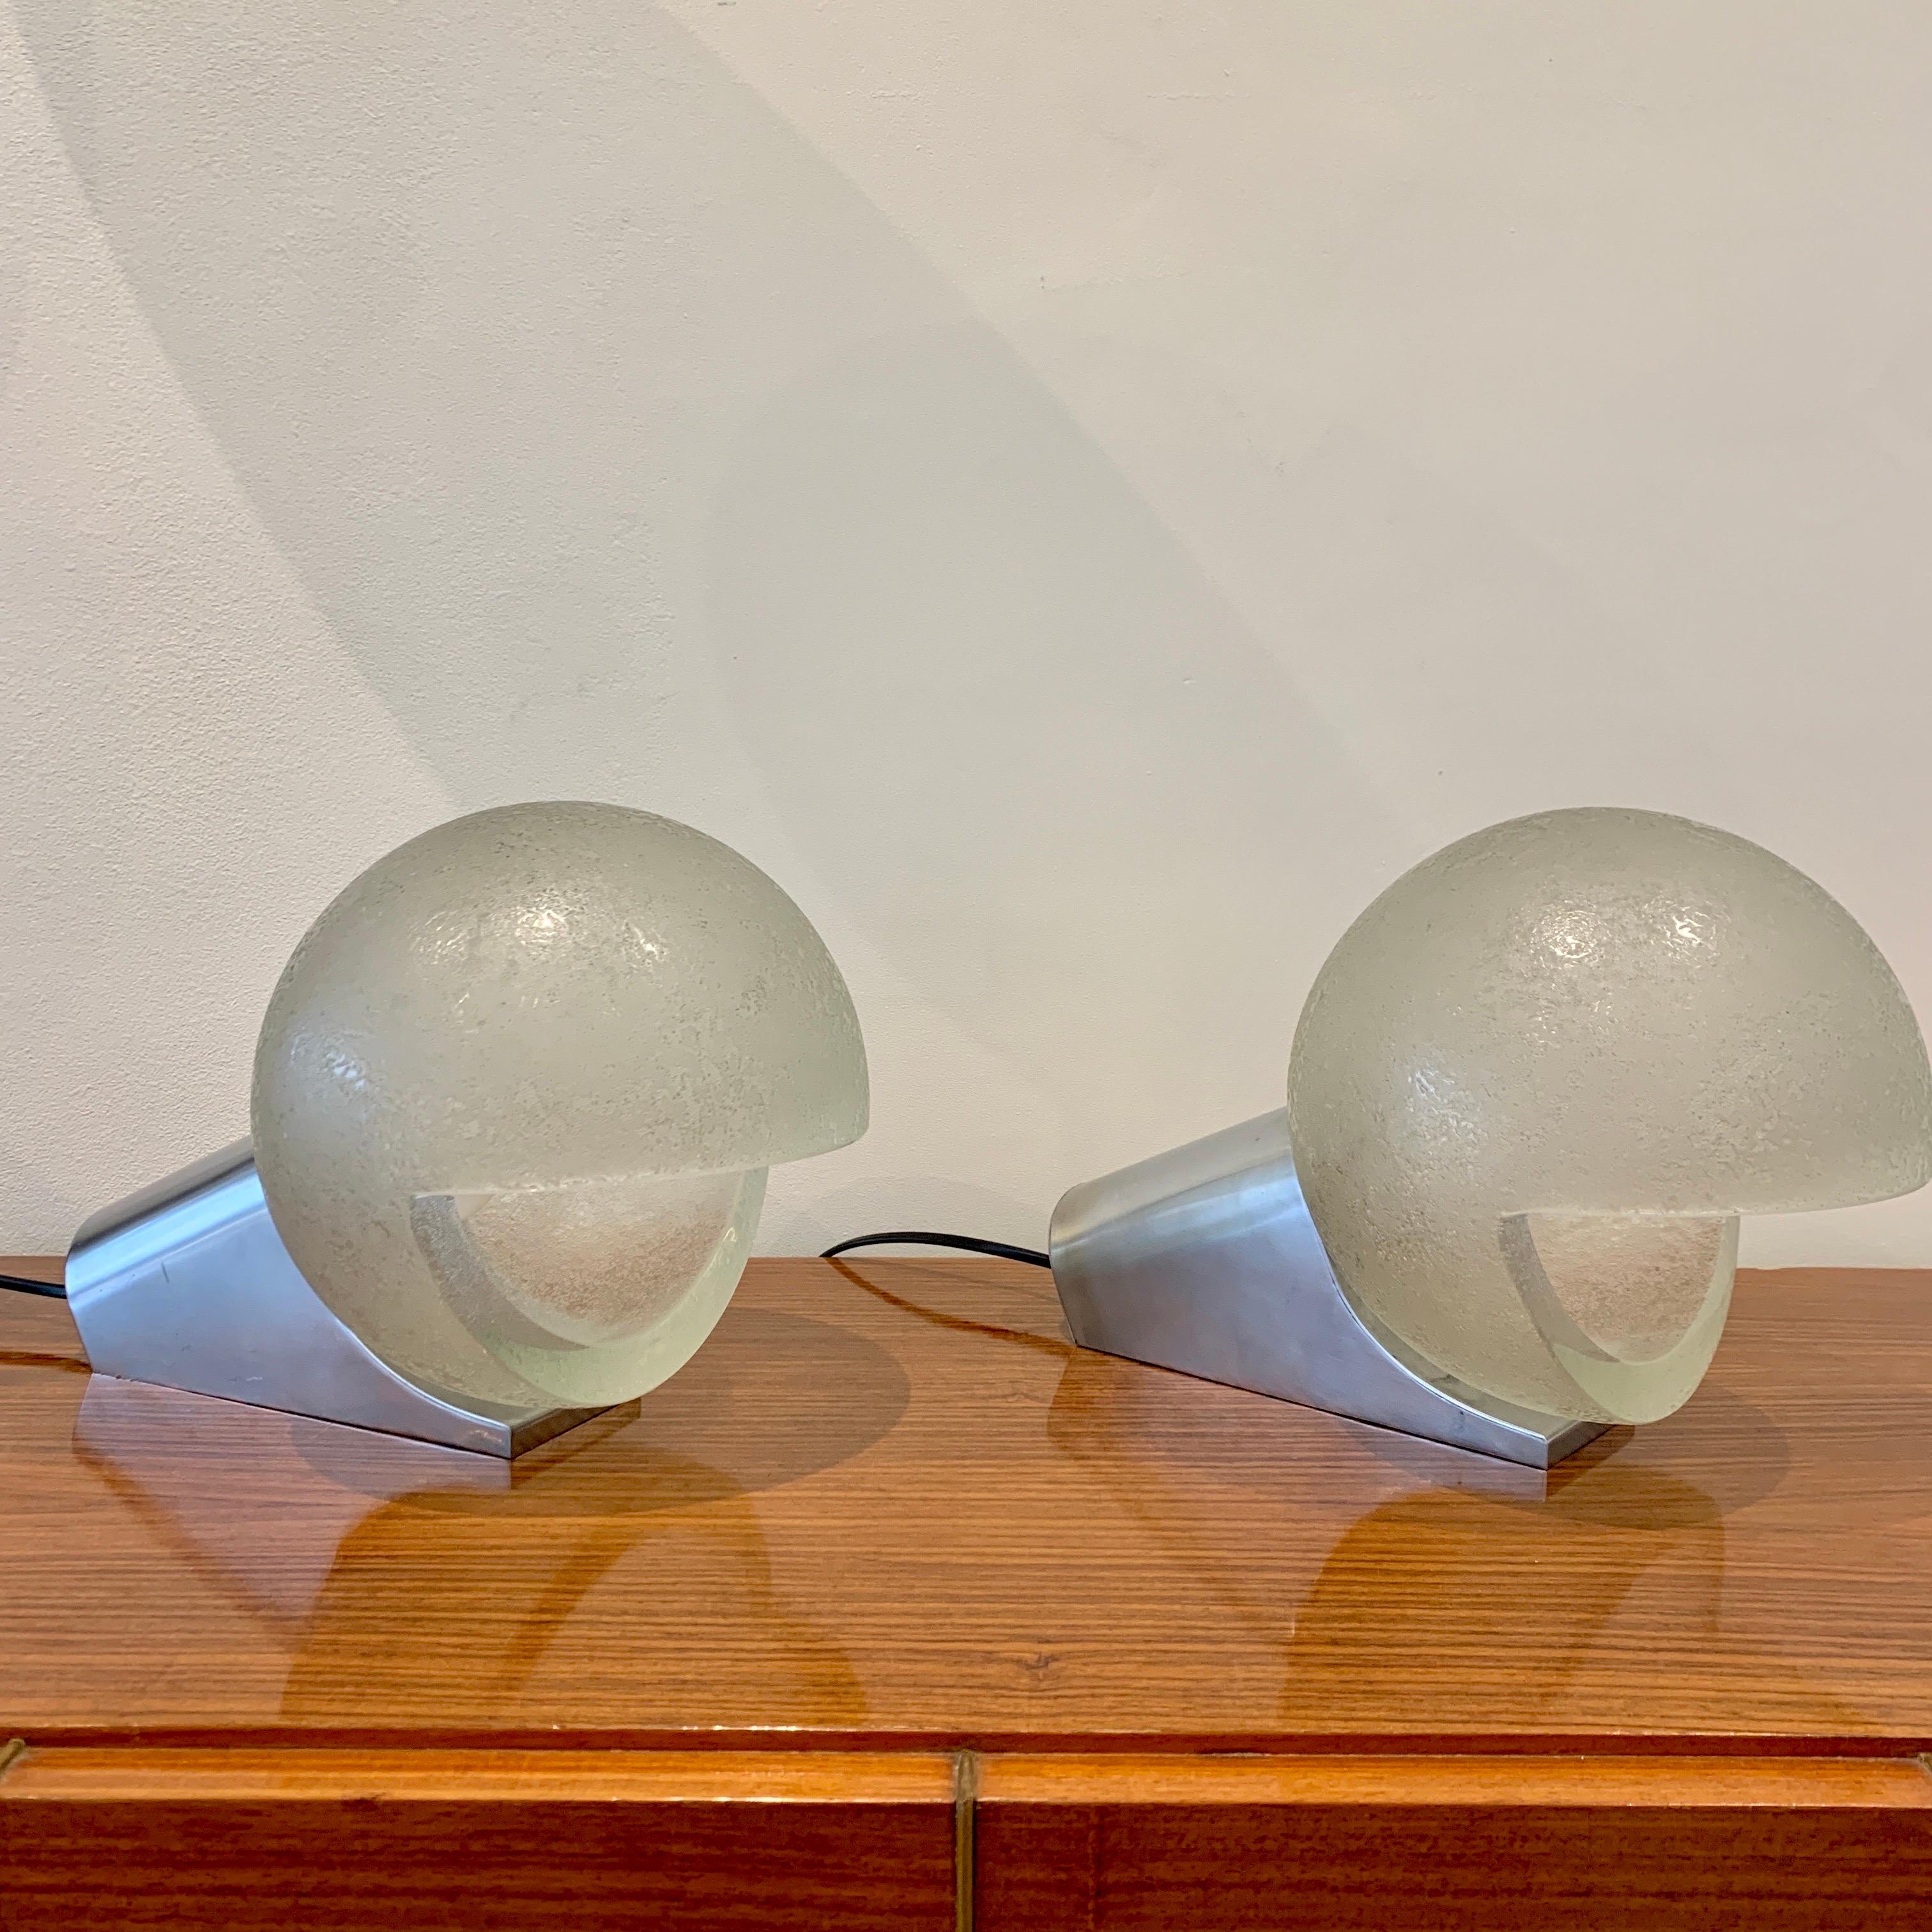 Seguso is famous Glass workshop active in Murano. They created glass masterpieces throughout the twentieth century. The pair of lamps is listed as model 14462 (see photo). The present model is handmade. The glass is handmade, blown, and then worked